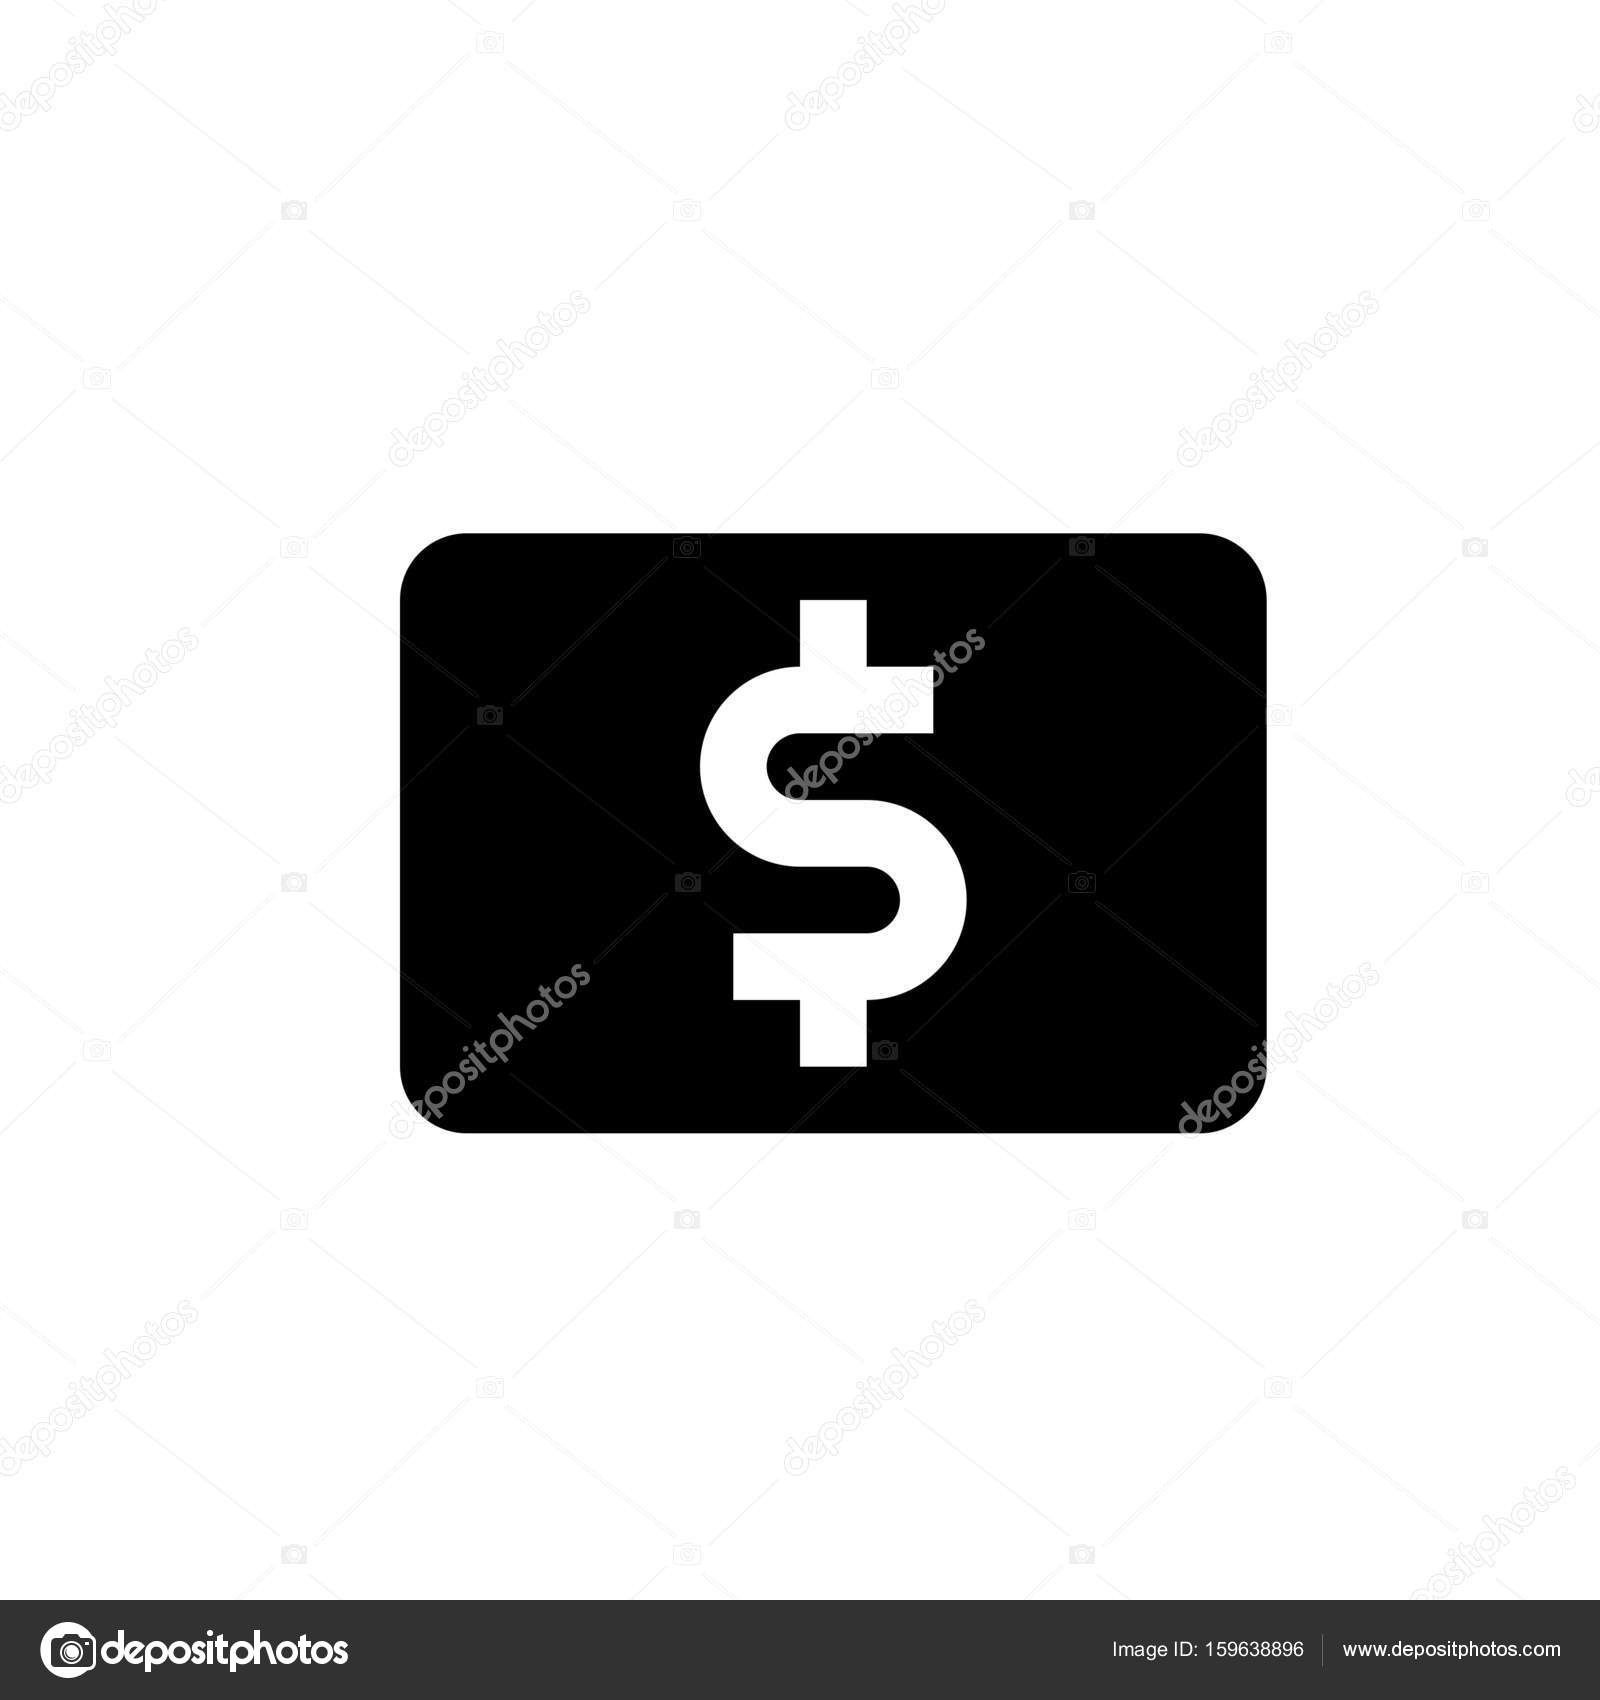 Cash stack, currency, dollar sign, note bundle, note stack, paper 